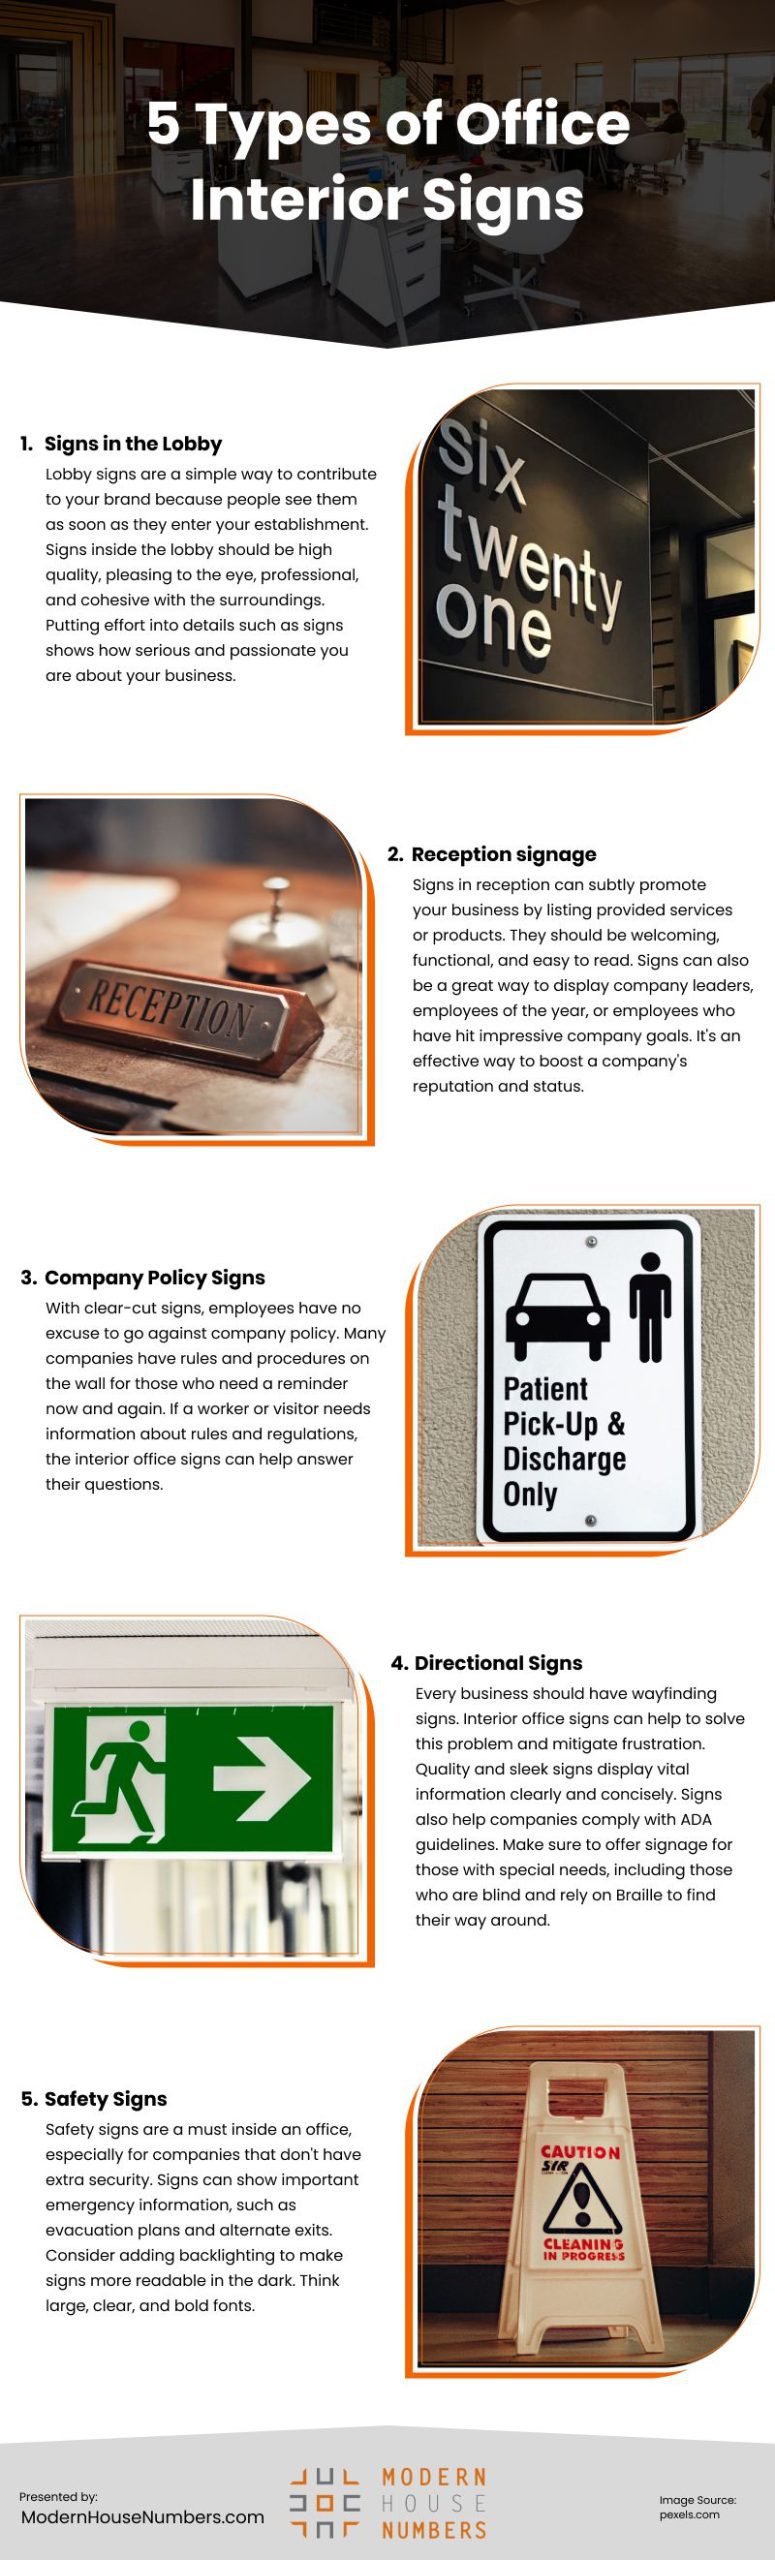 5 Types of Office Interior Signs Infographic